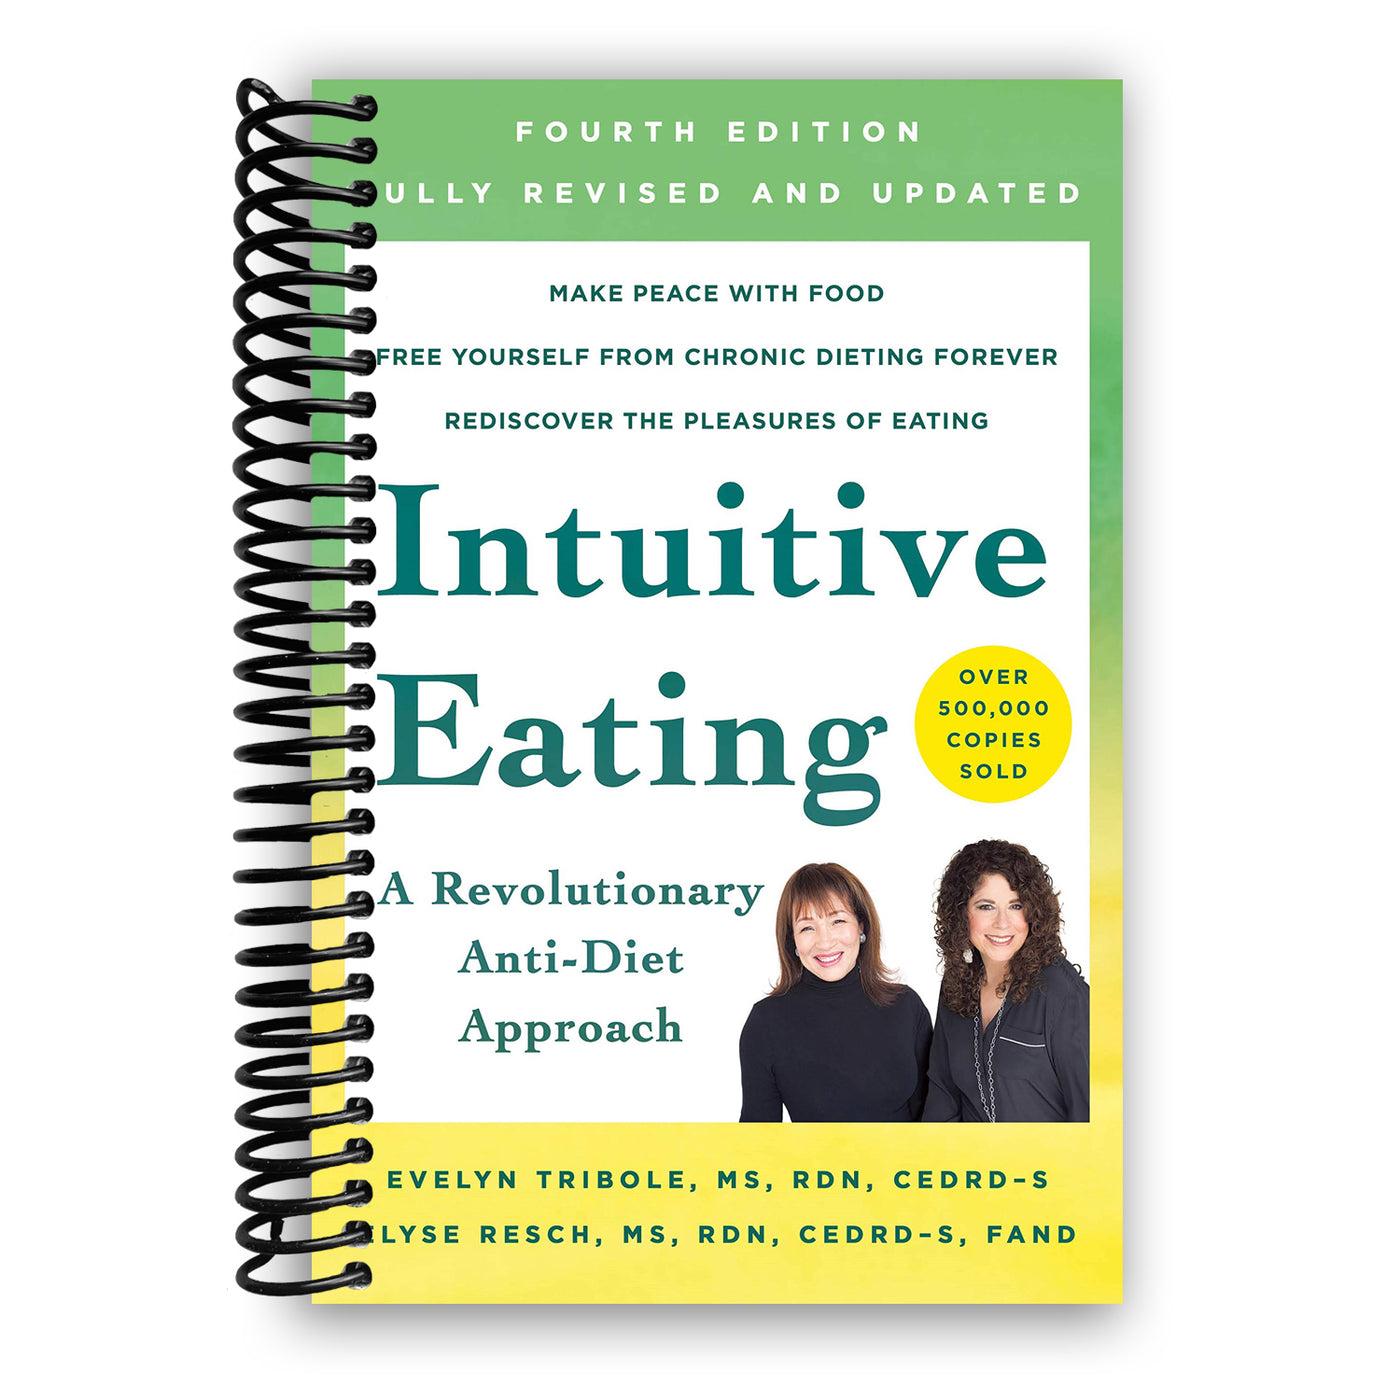 Intuitive Eating: A Revolutionary Anti-Diet Approach (Spiral Bound)